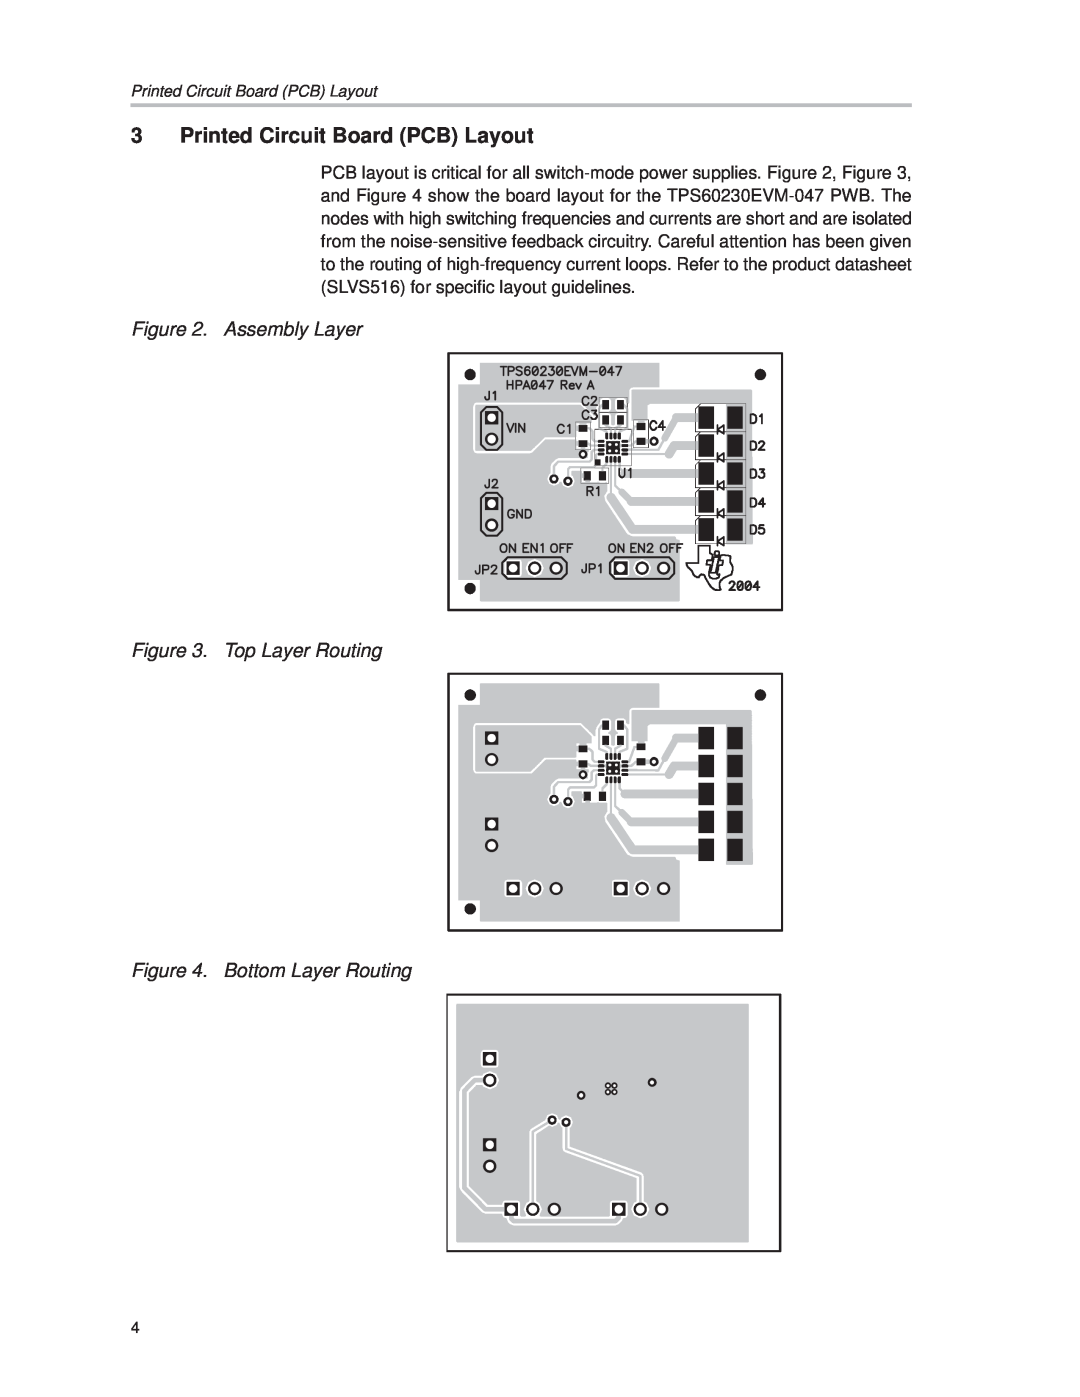 Texas Instruments TPS60230EVM-047 manual Printed Circuit Board PCB Layout, Assembly Layer . Top Layer Routing 